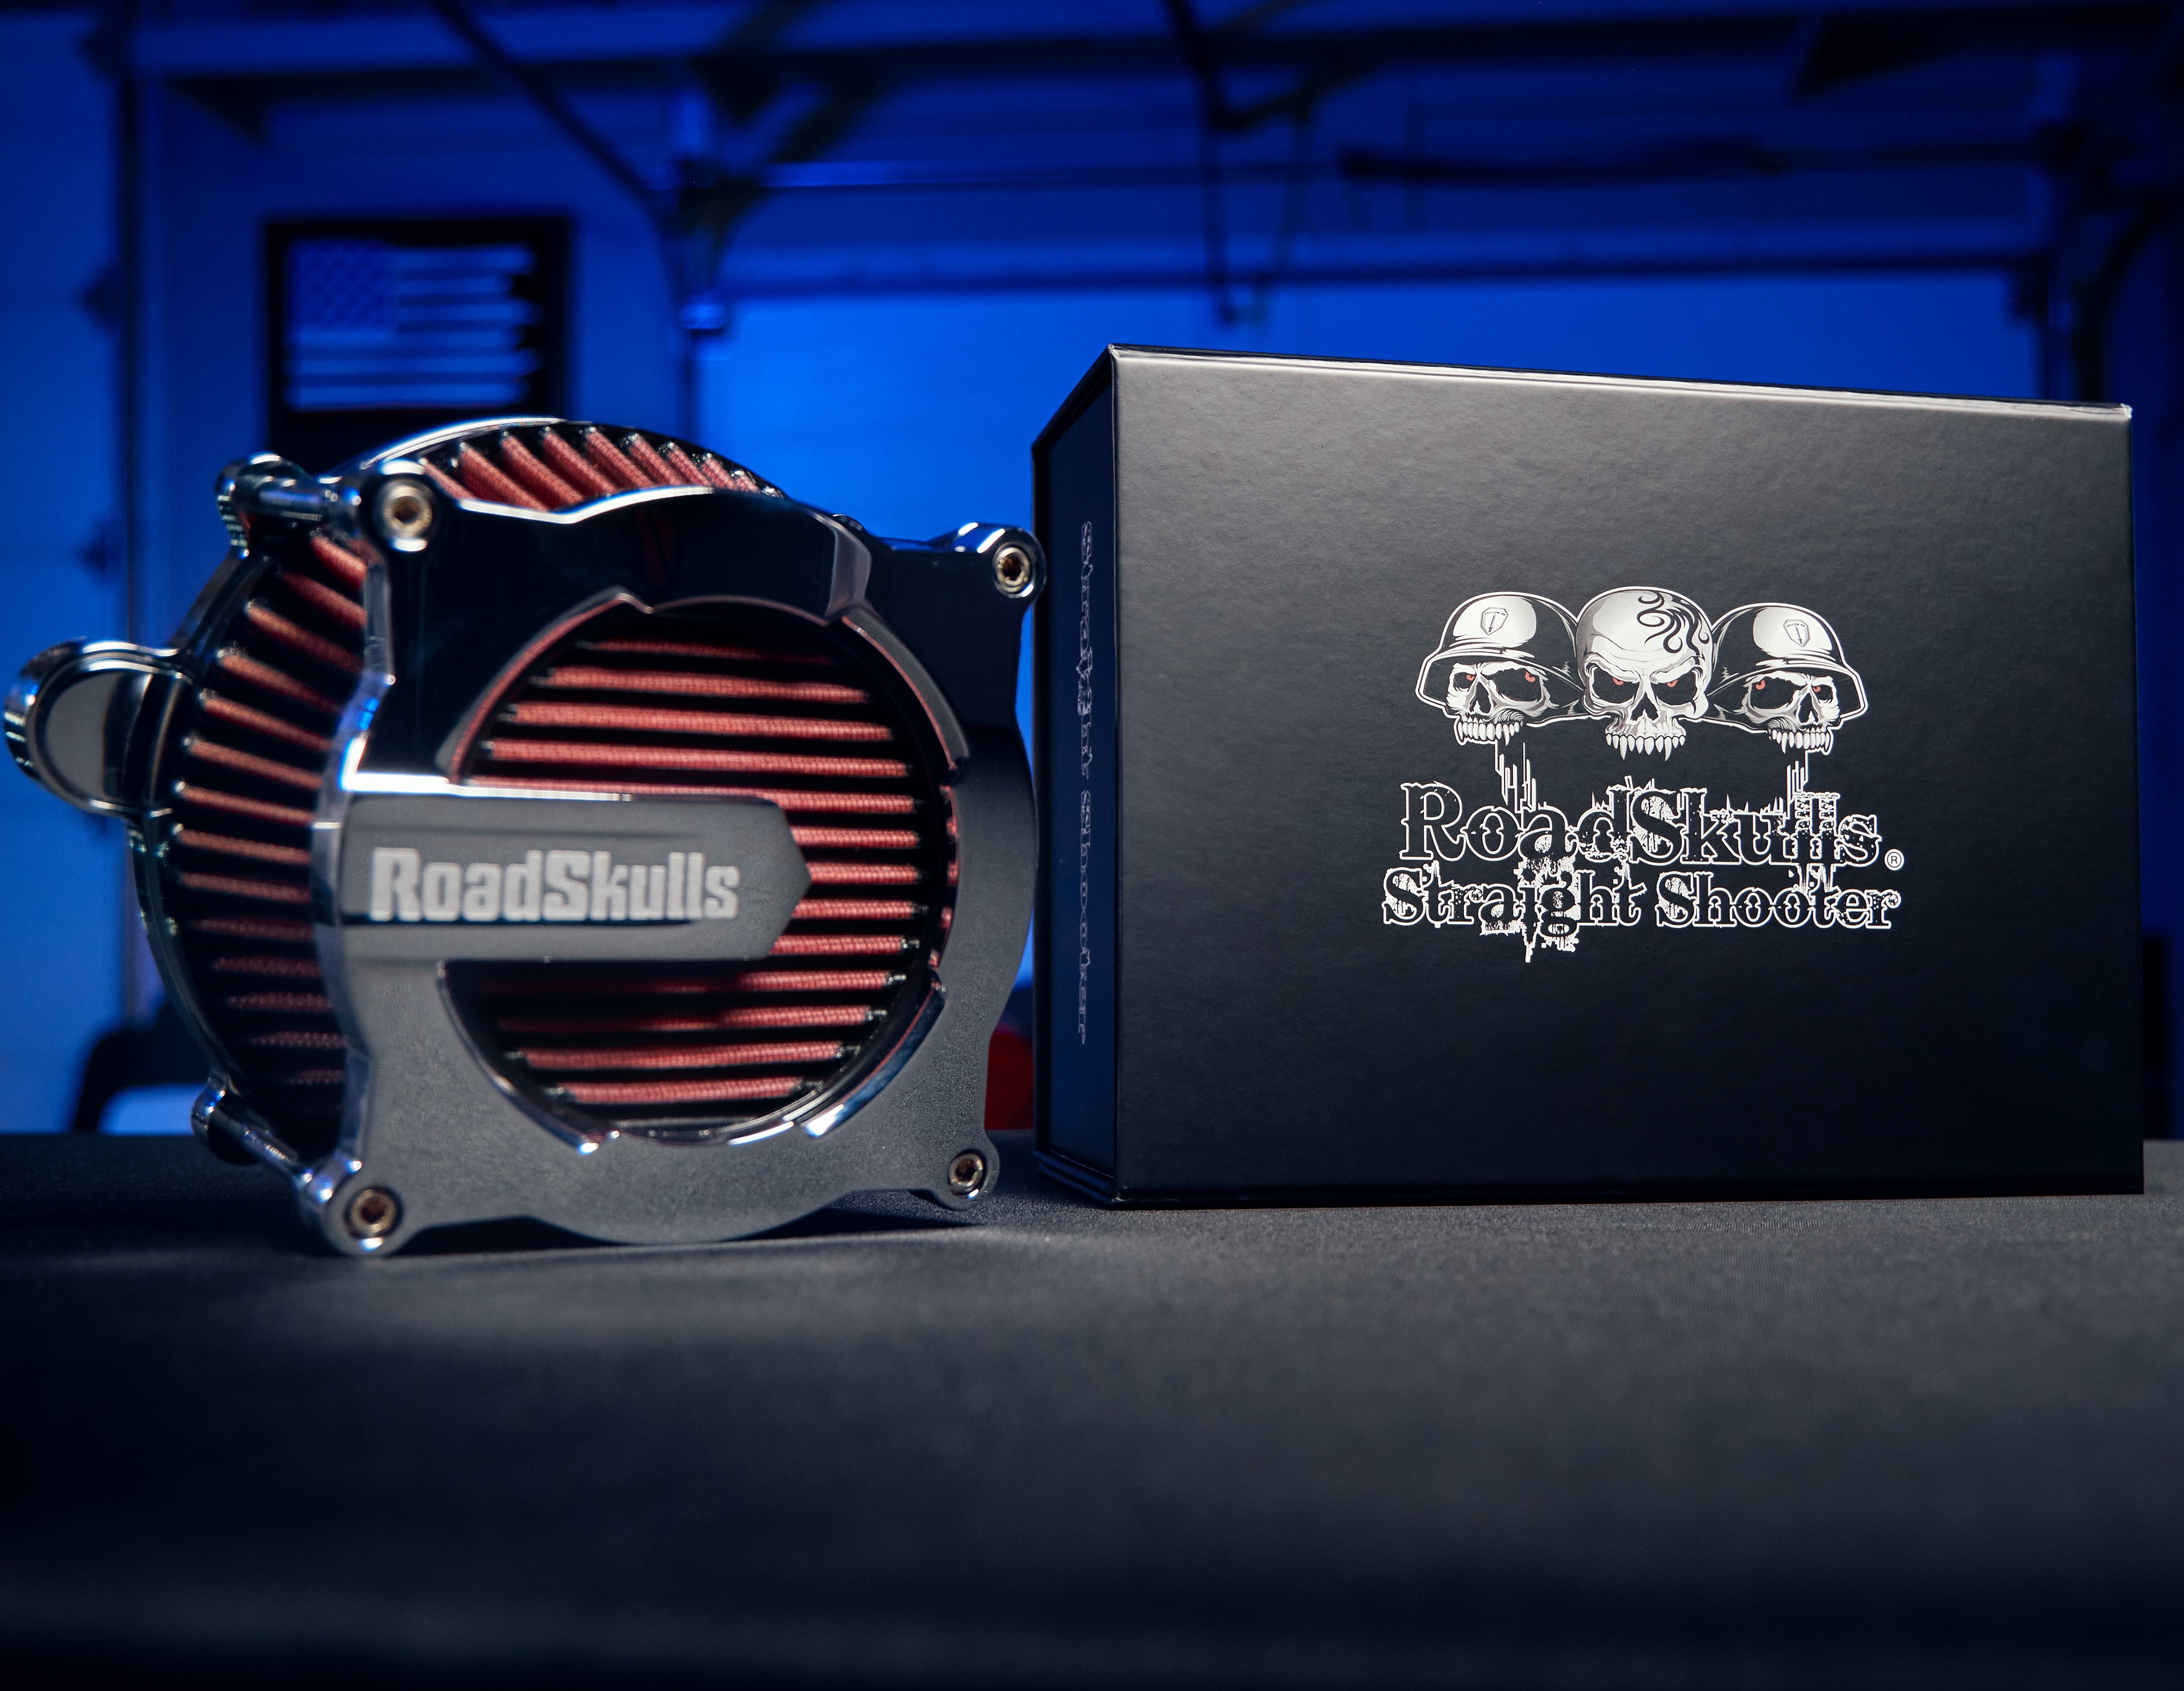 The Harley Straight Shooter air cleaner is a performance upgrade for Harley Davidson motorcycles that increases horsepower, torque, and fuel efficiency. It features a patented electric induction system that helps to improve airflow and combustion.